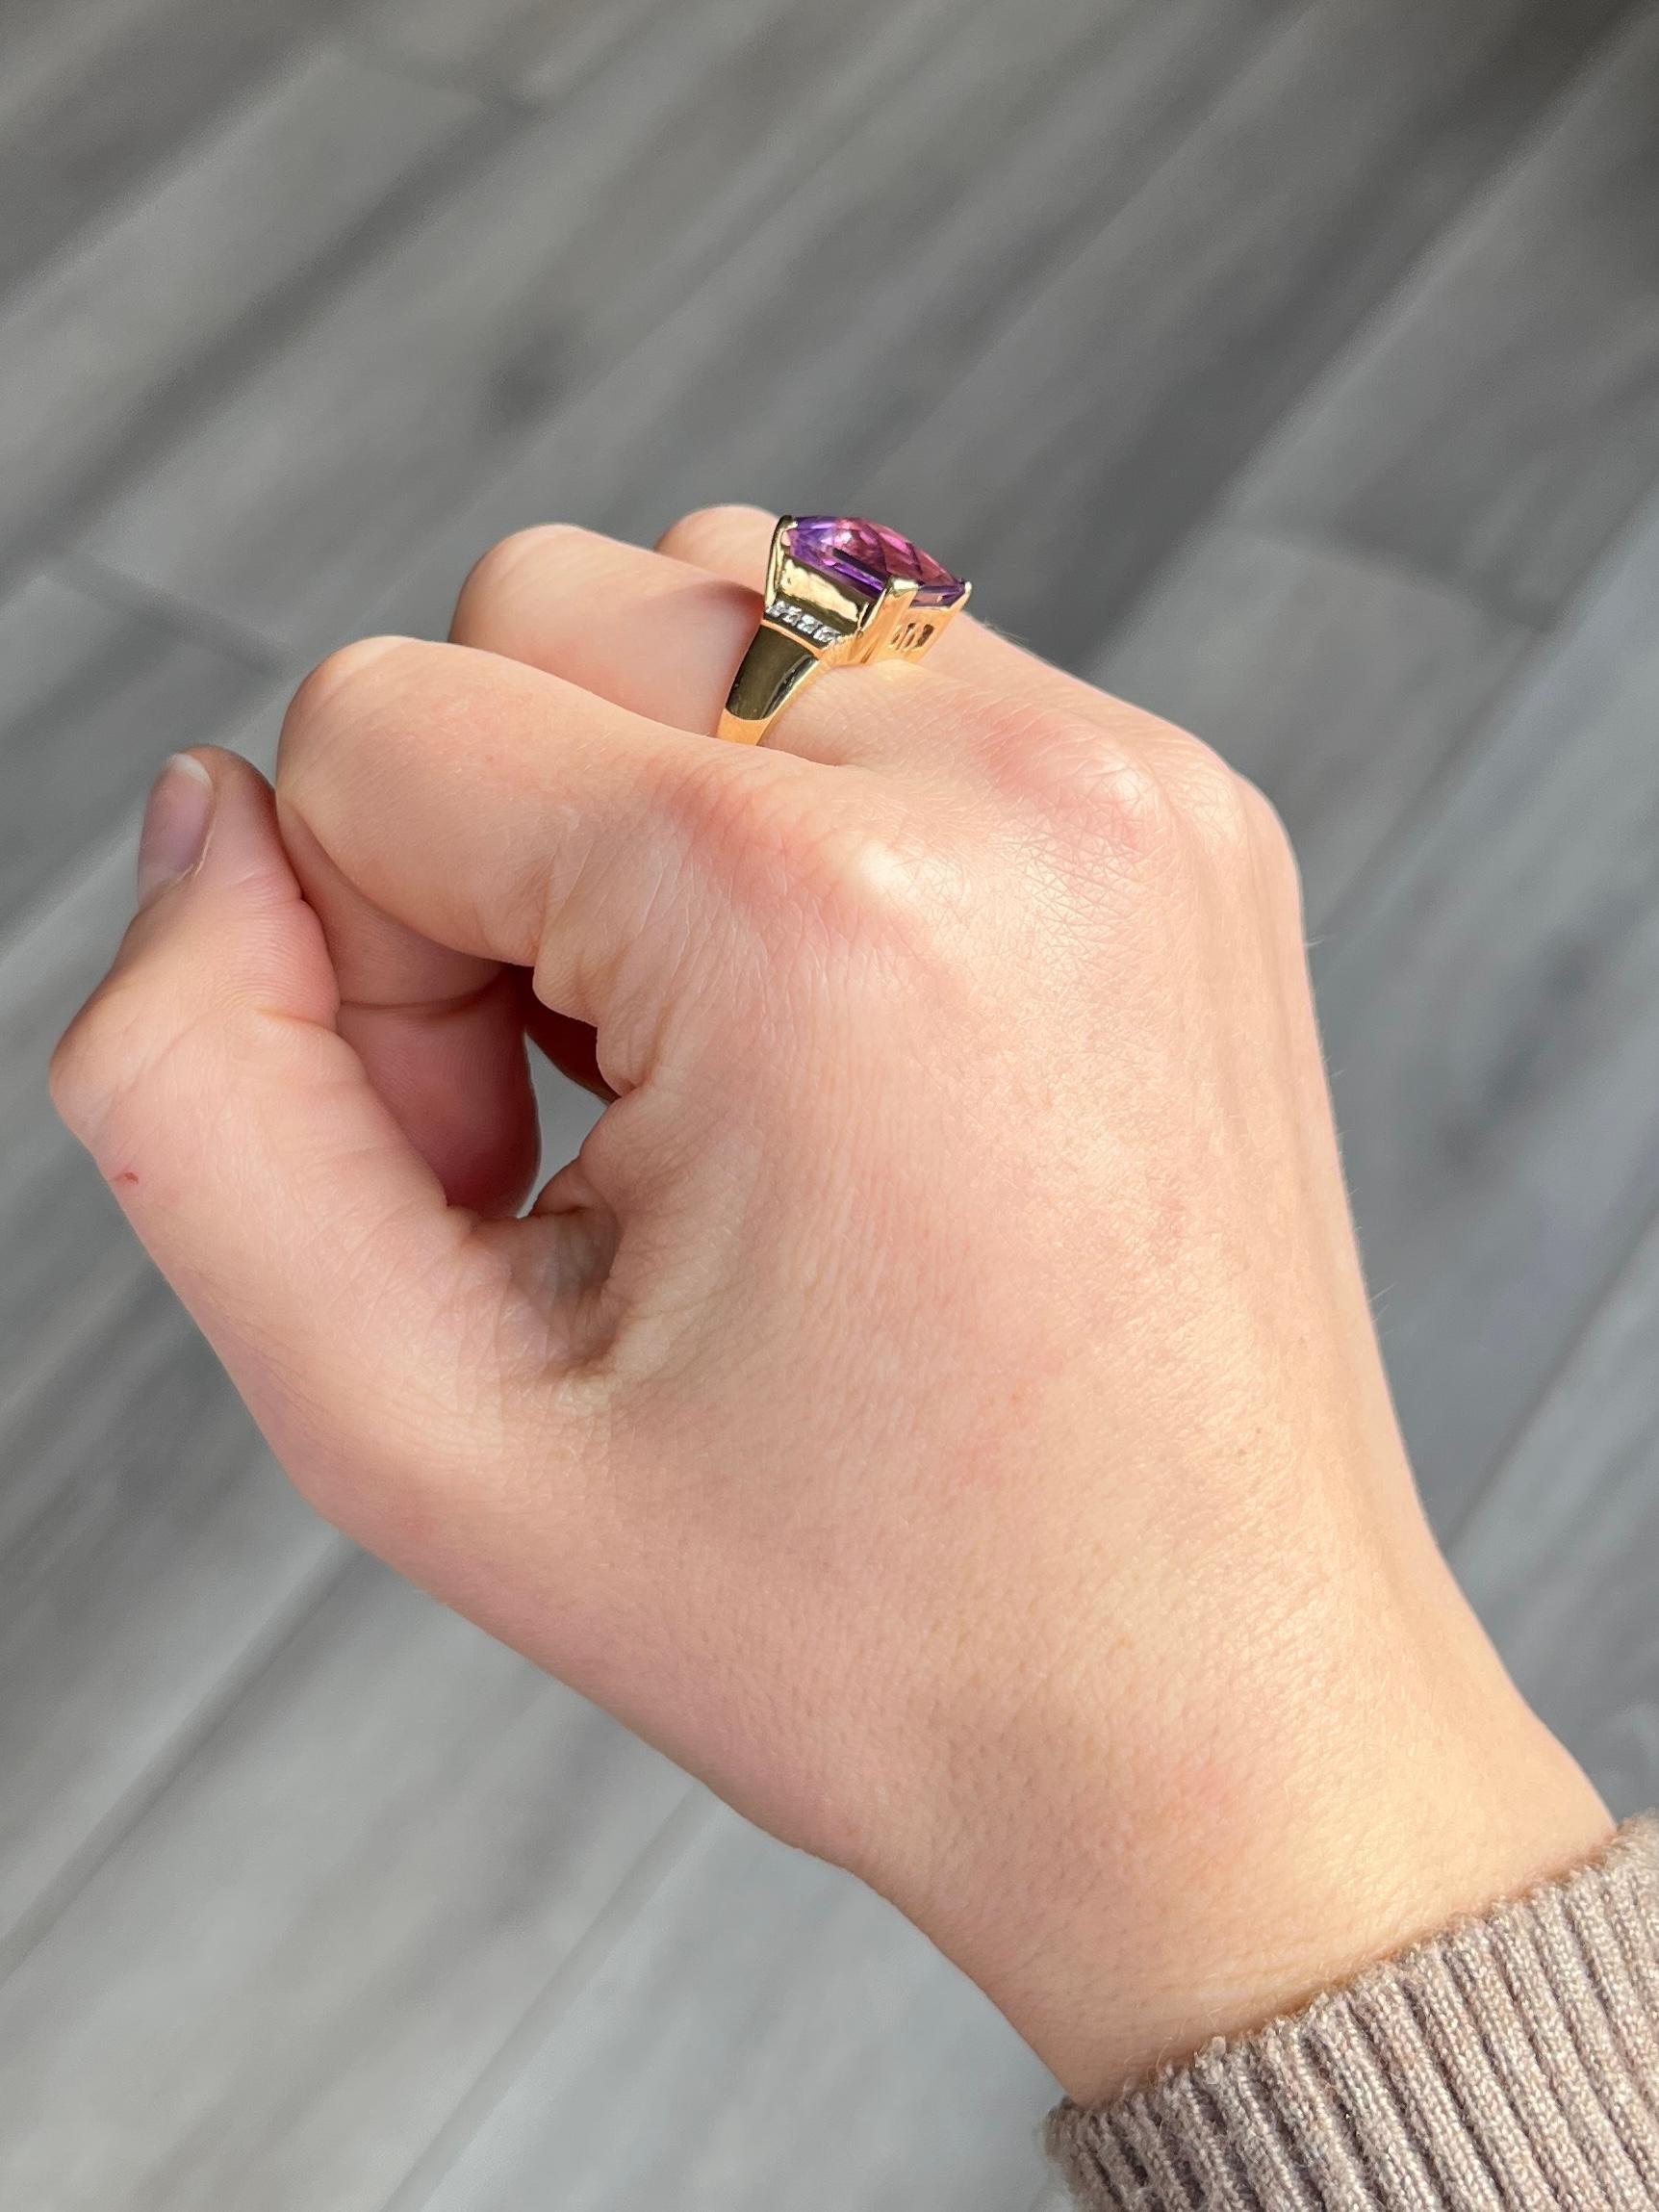 The amethyst stone in this ring is bright and a gorgeous colour. Each shoulder holds four diamonds which have a total of 8pts per shoulder. The amethyst measures approx 5ct. Amethyst dimensions 10x12mm. Modelled in 9 carat gold and diamonds set in